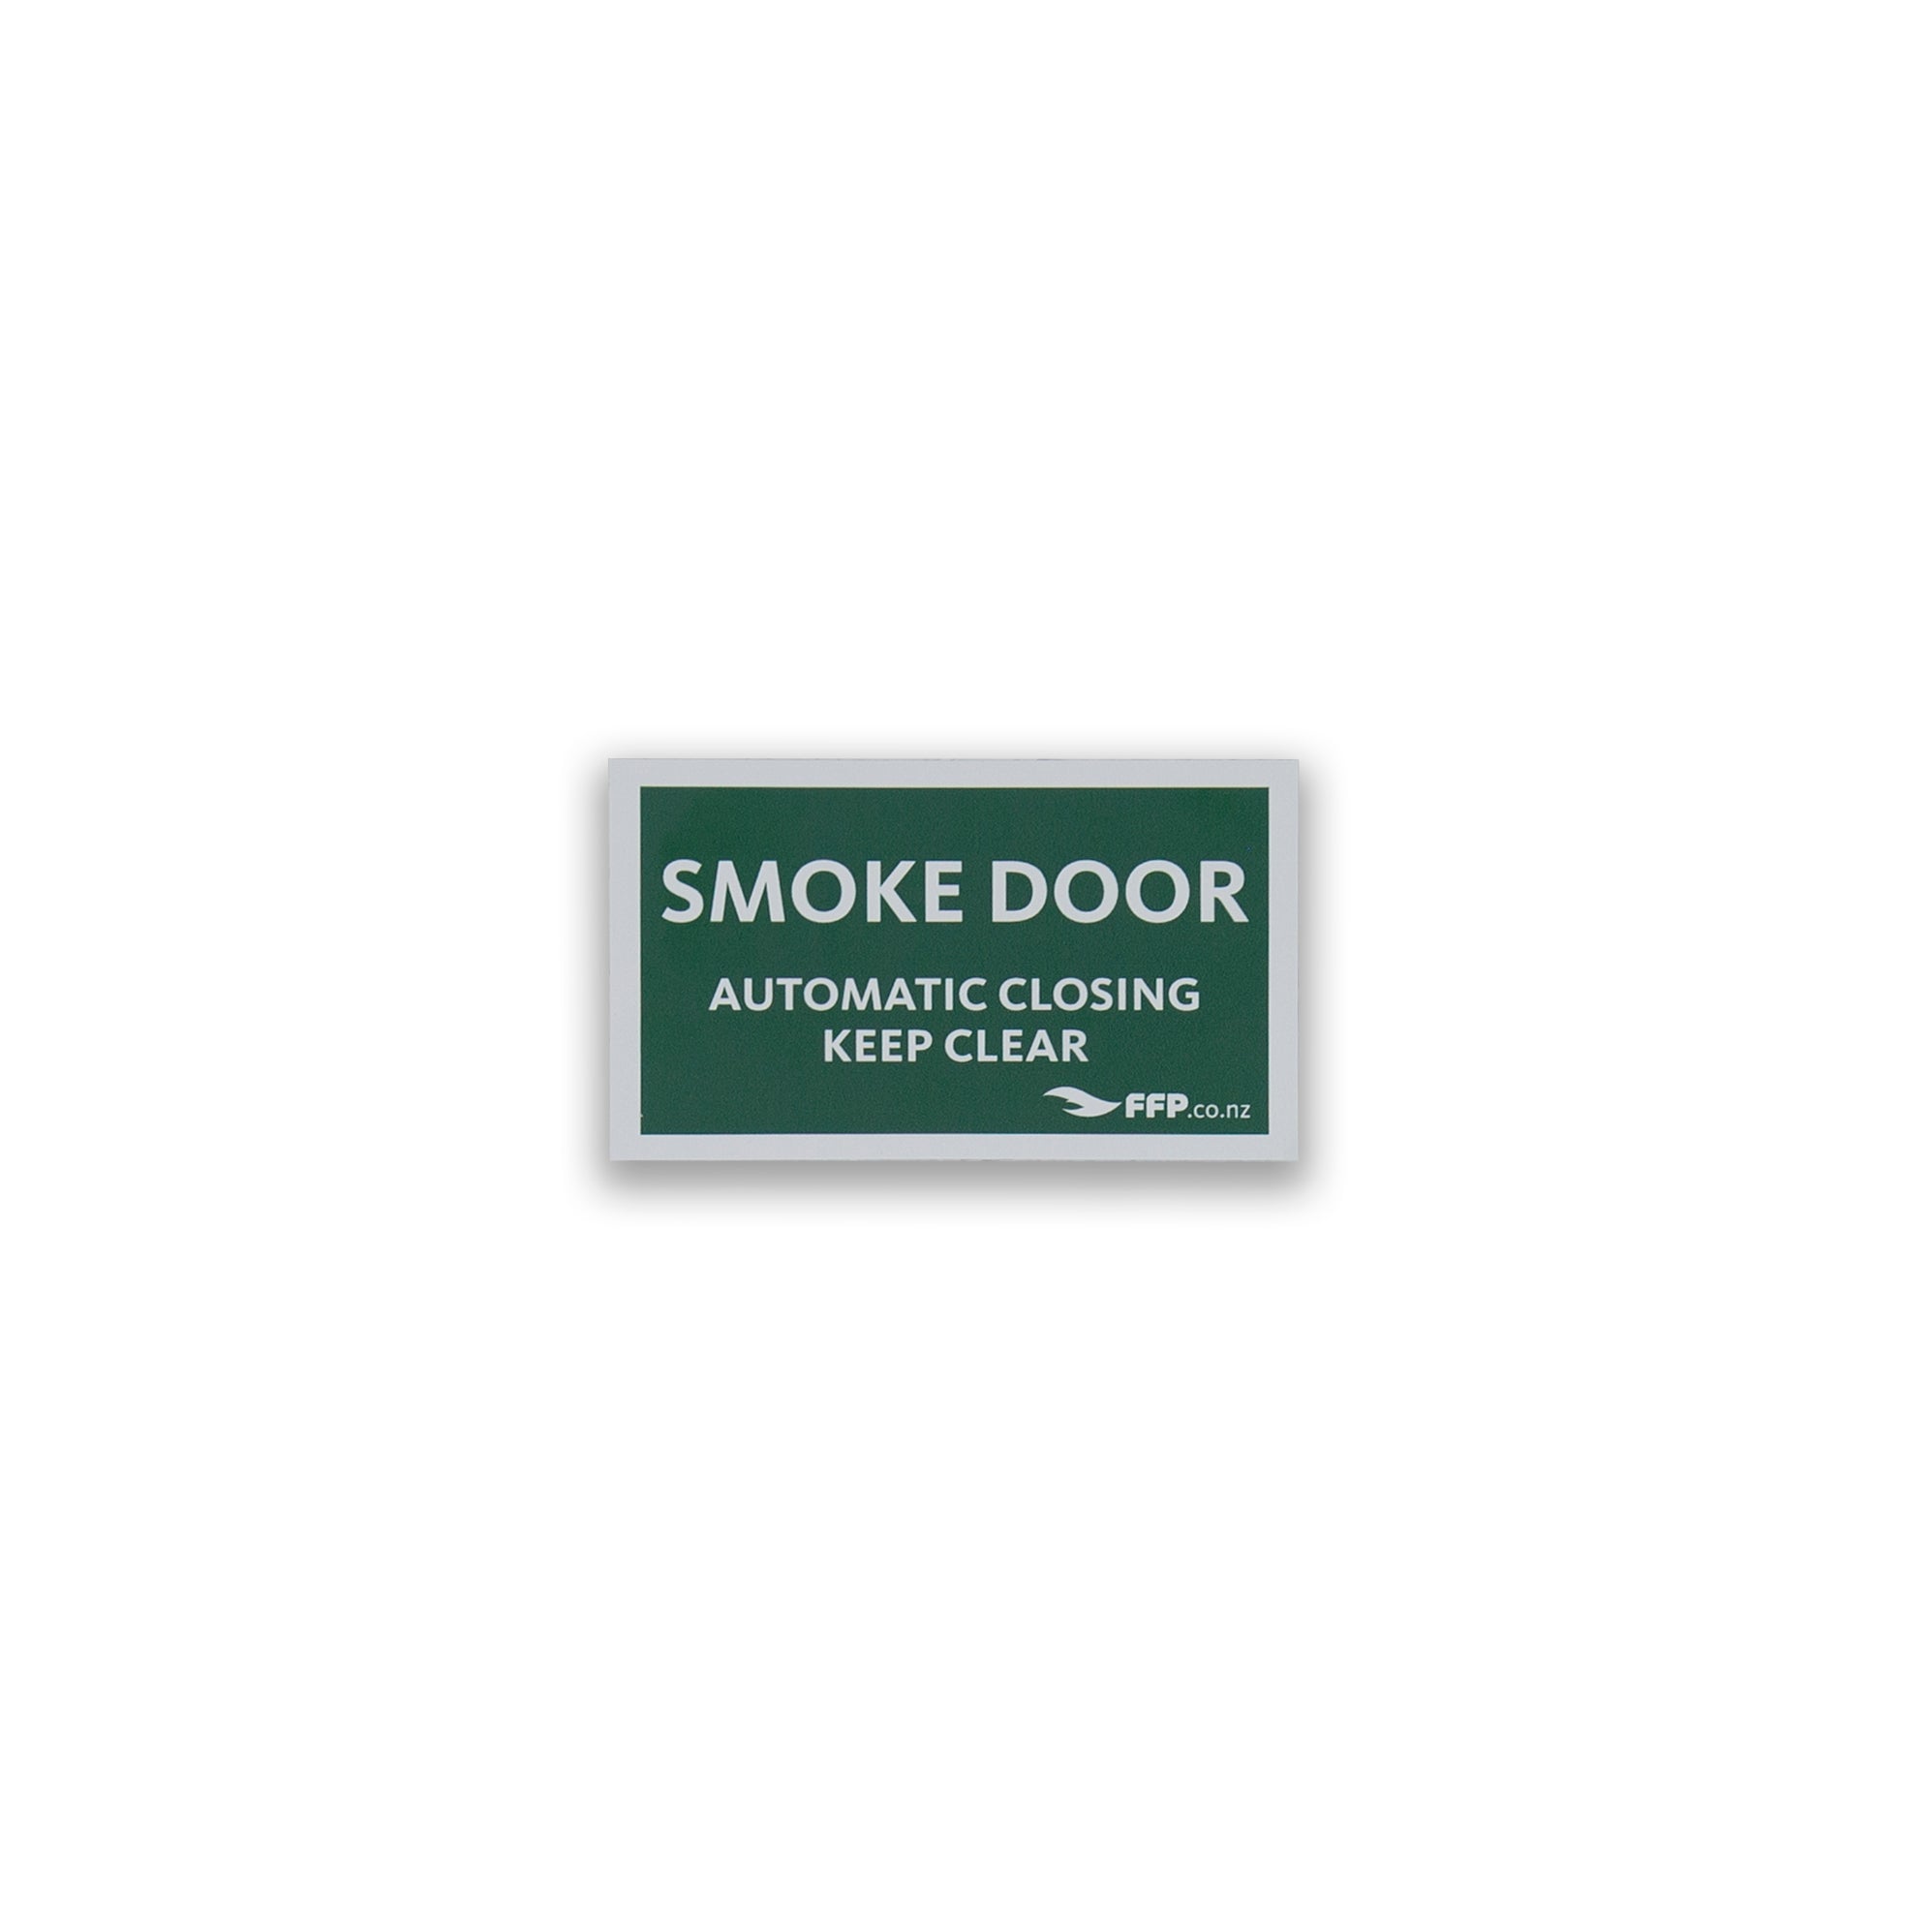 Smoke Door - Automatic Closing - Keep Clear Sign